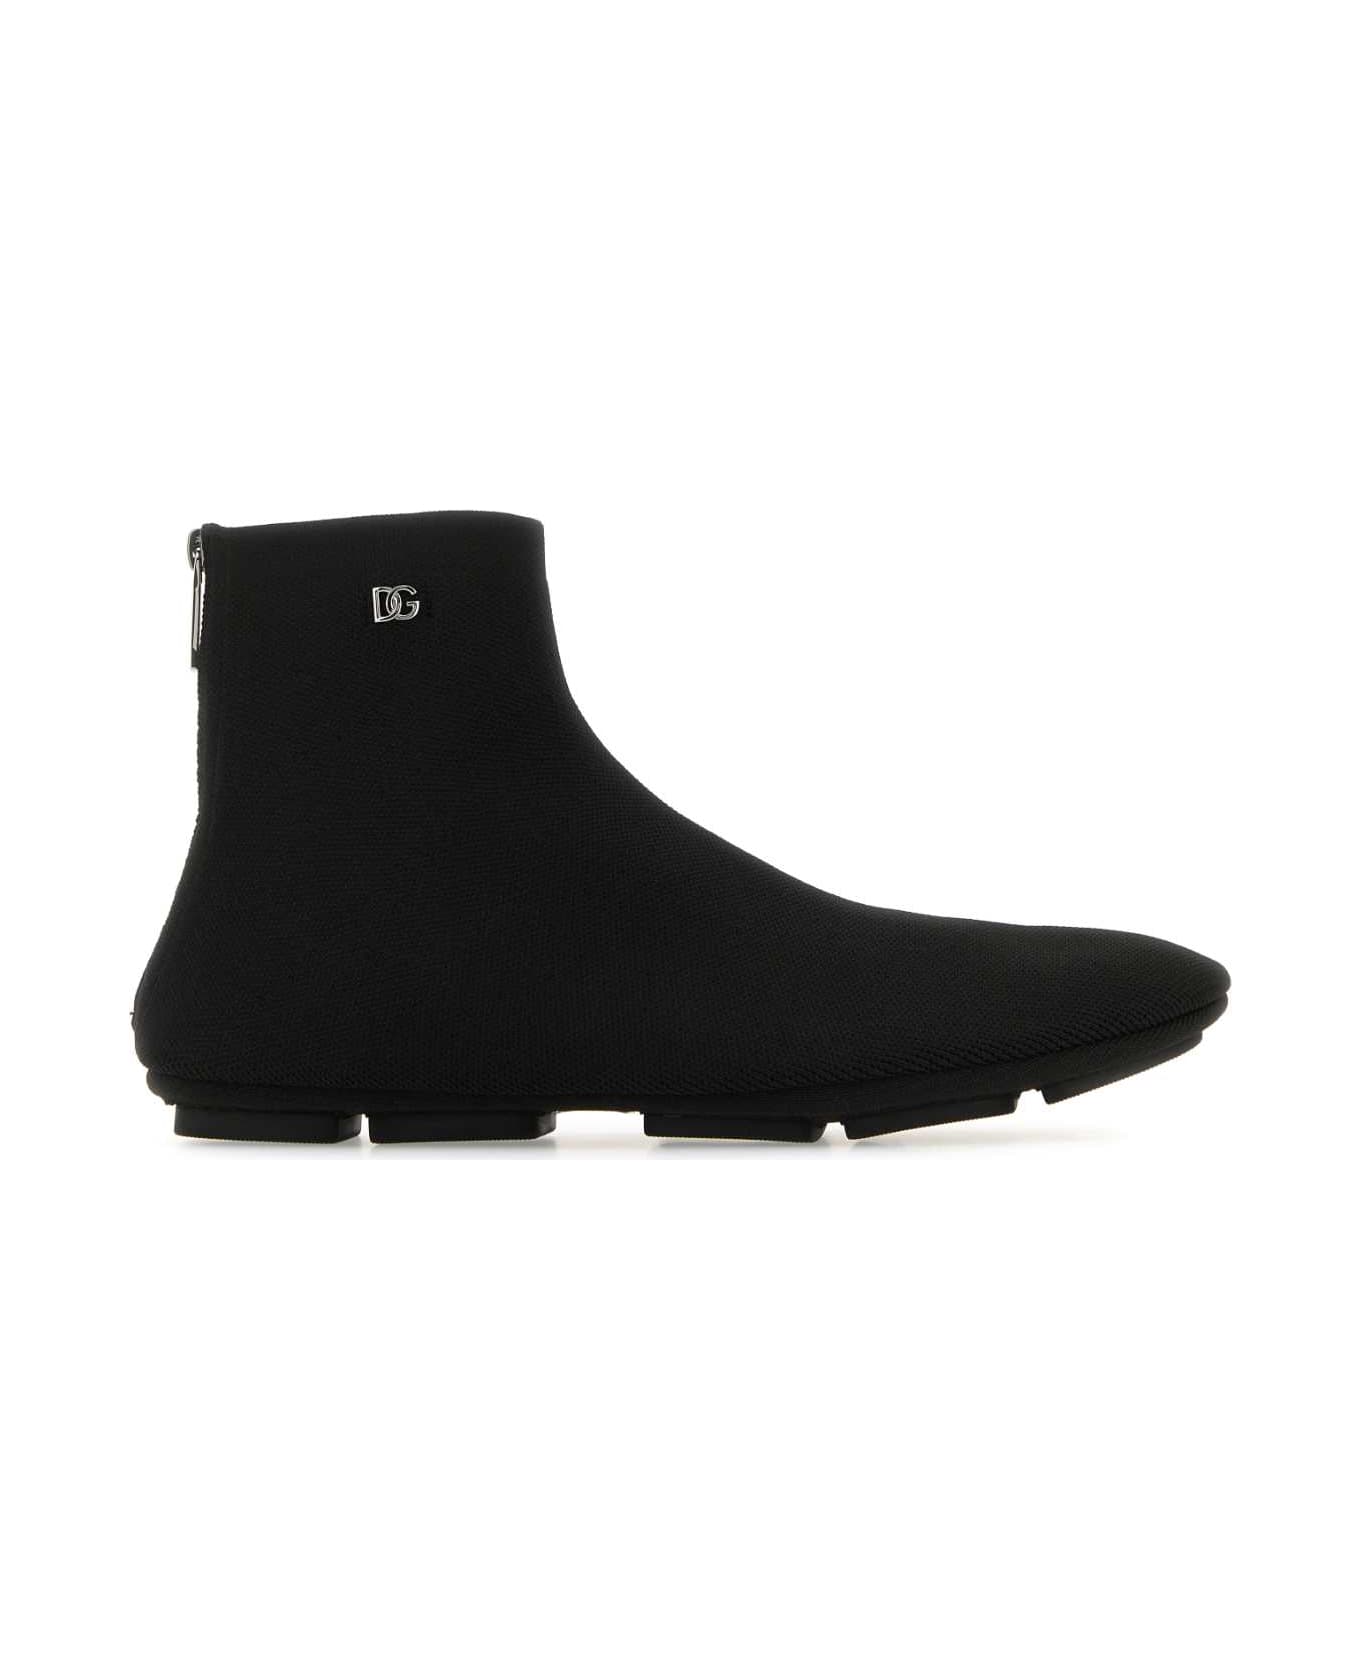 Dolce & Gabbana Ankle Boots - NERO